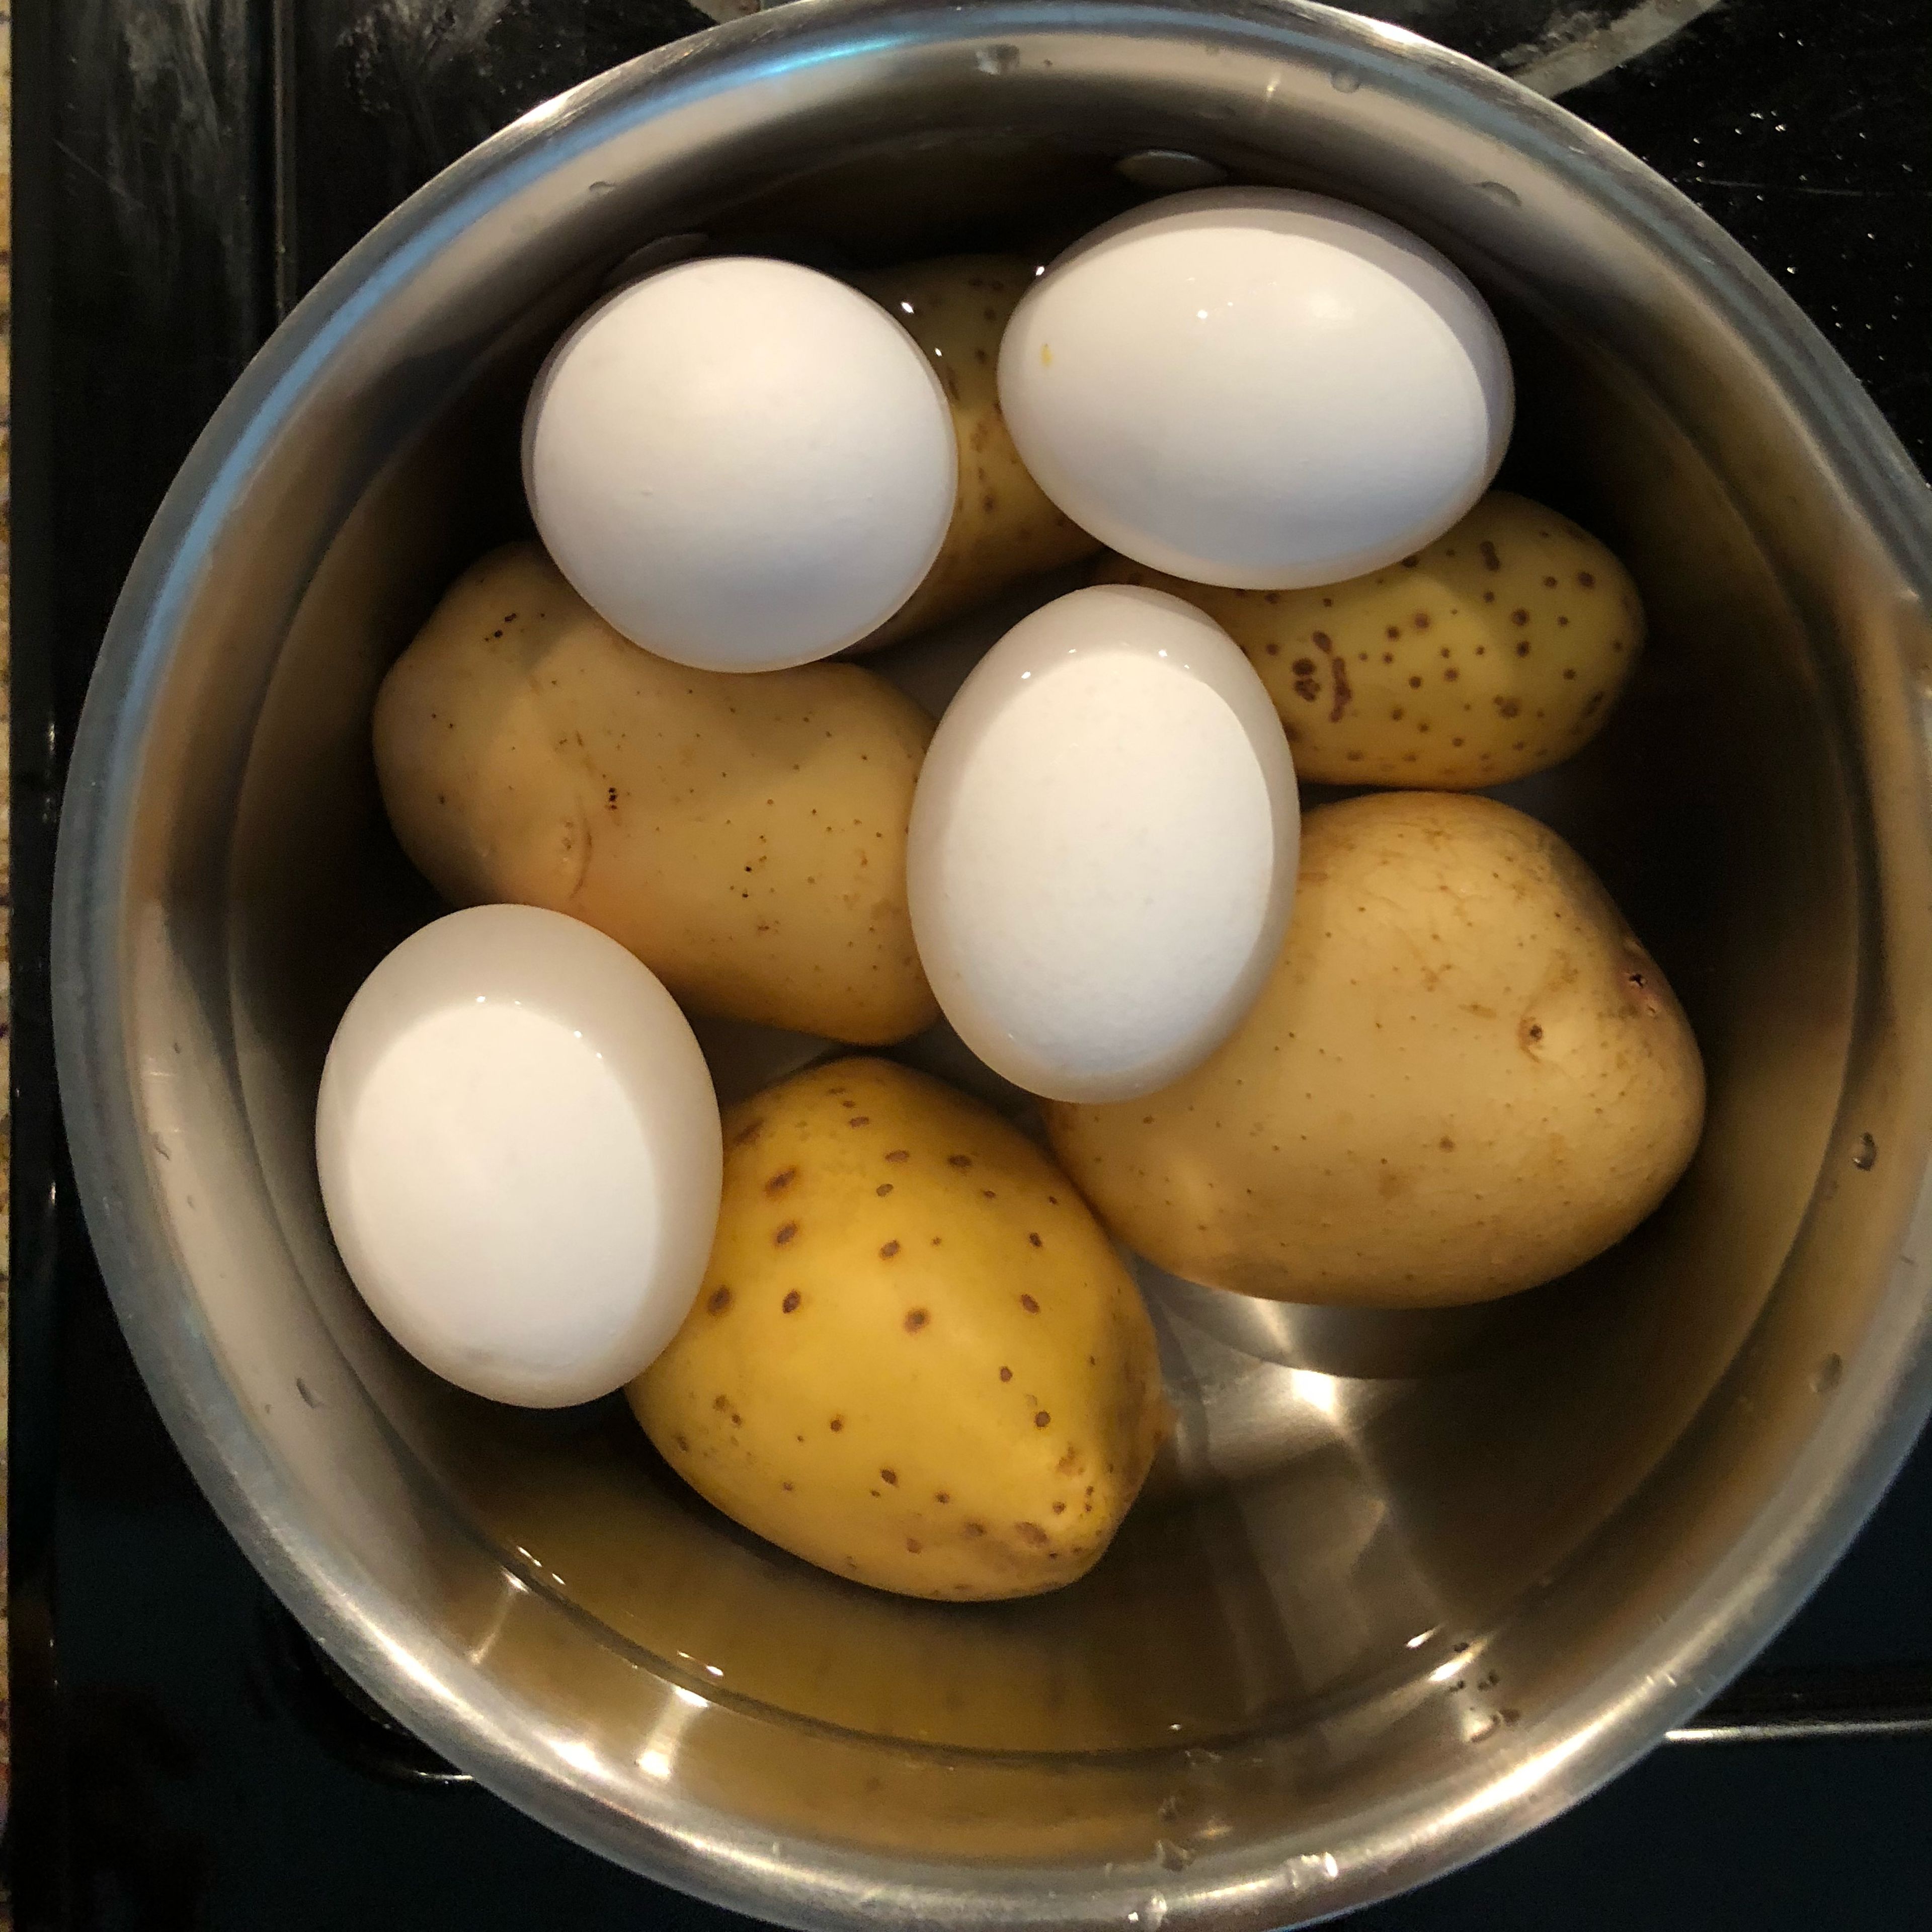 Put potatoes and eggs together in a pot of water and then turn on to boil. Boil potatoes until soft for about an hour and eggs for 30mins. (Boil time includes the time it takes for water to start boiling). After done boiling let me them cool for 30 minutesand peel potatoes. Peel eggs under cold water.